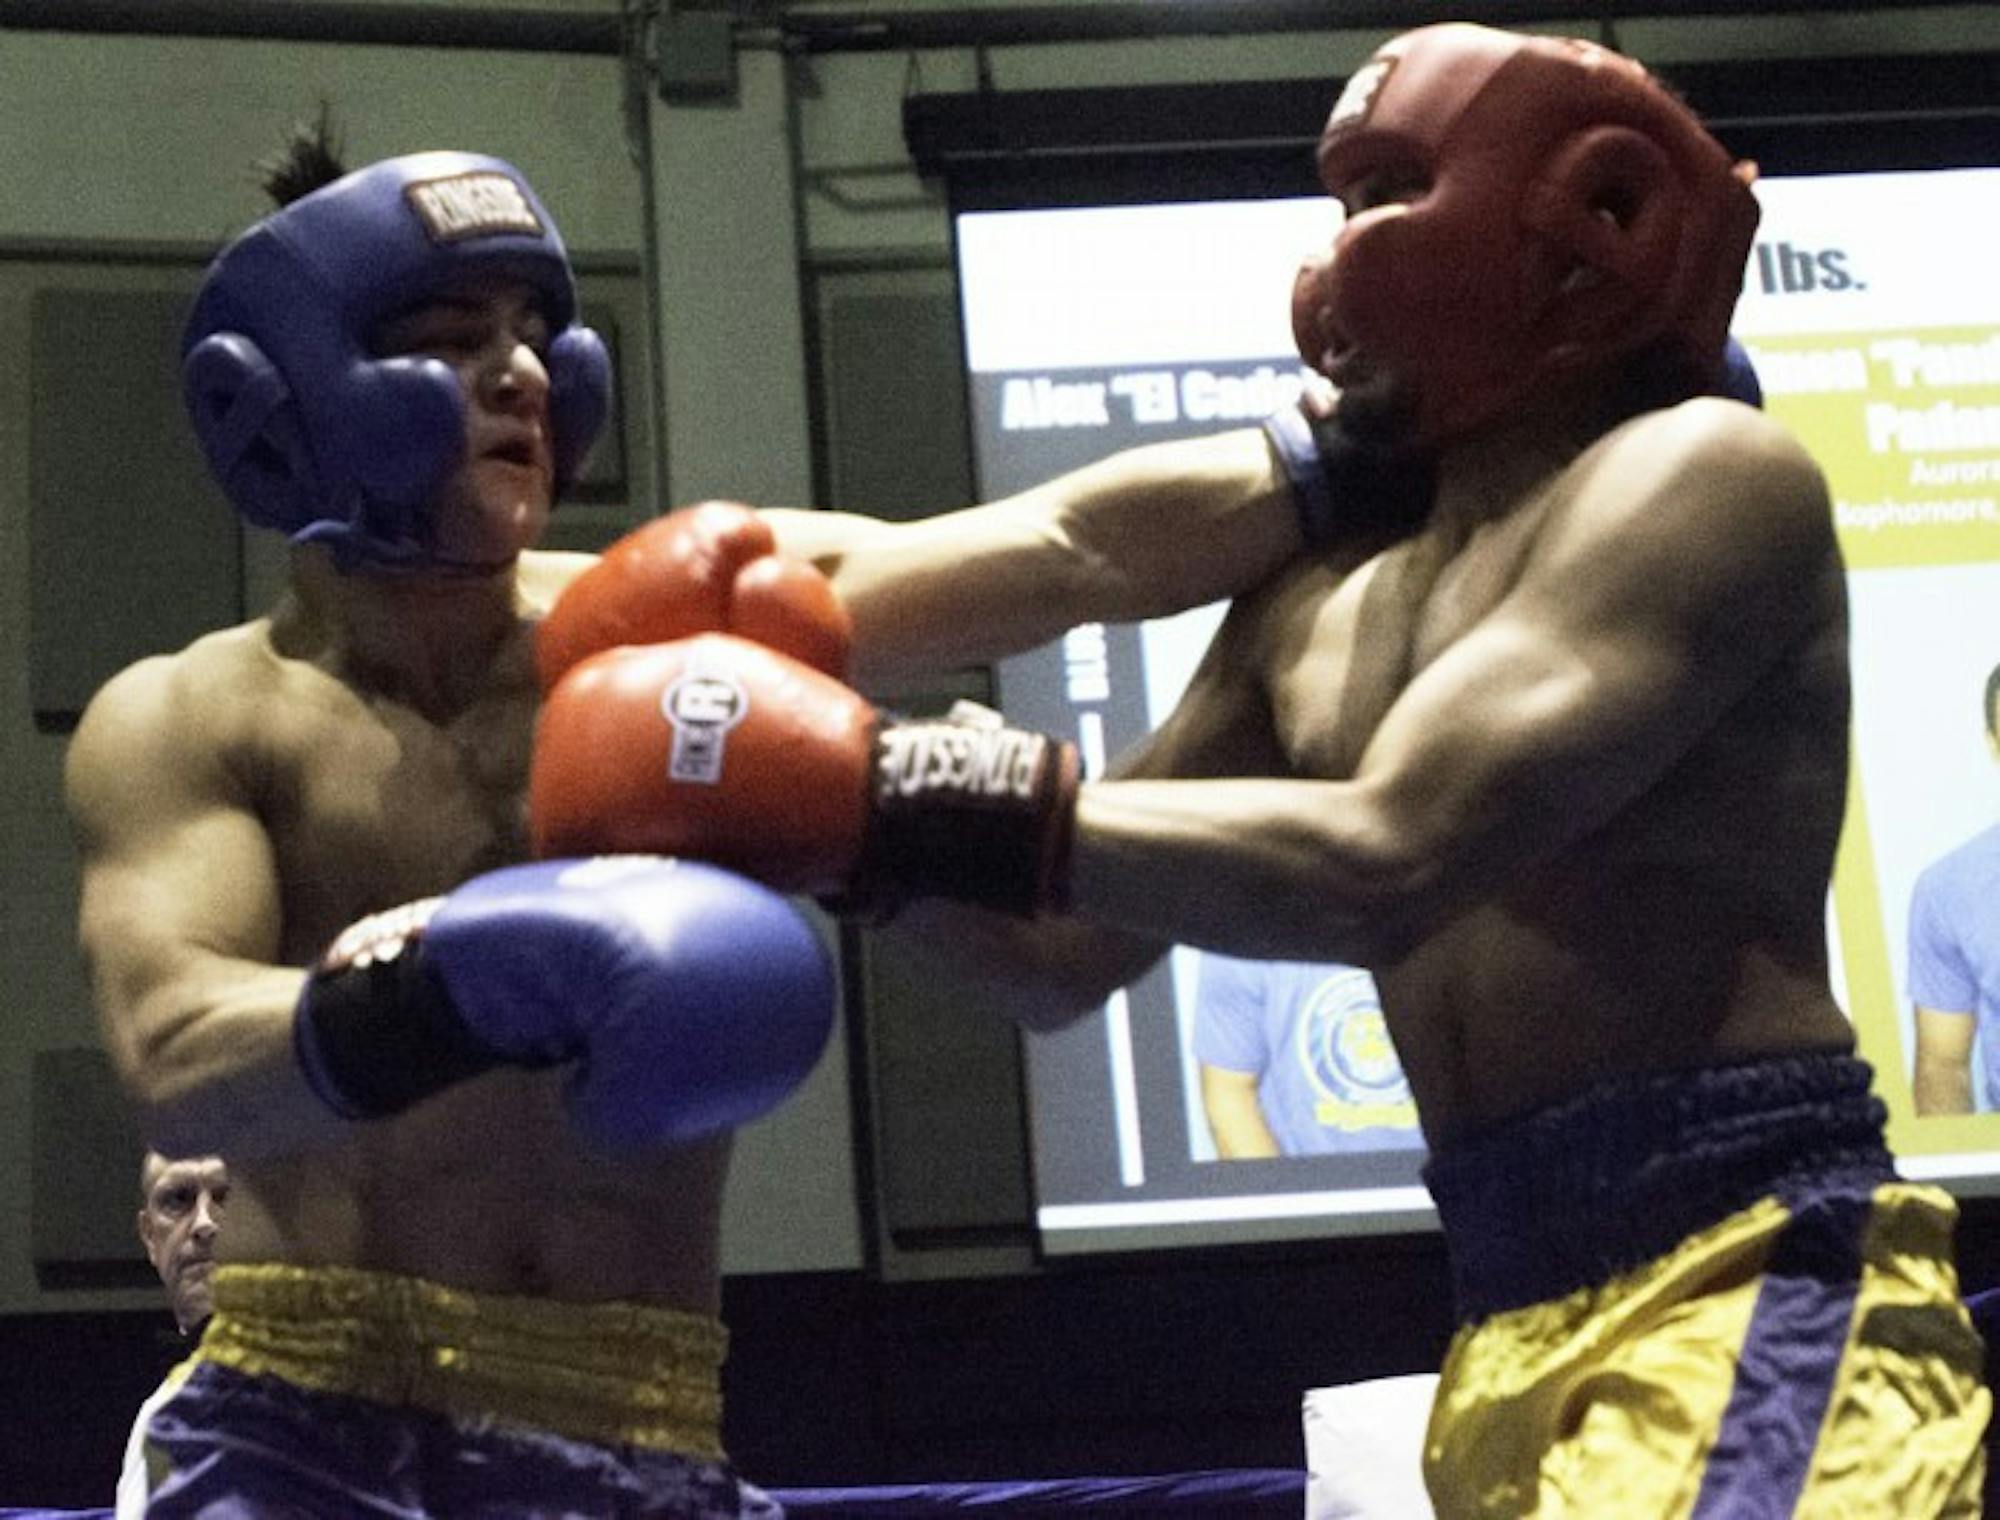 Alumni senior and Bengal Bouts captain Alex Alcantara lands a left jab to his opponent, Keough sophomore Simon Padanilam, during a preliminary round bout Feb. 14 at the Joyce Center Fieldhouse.